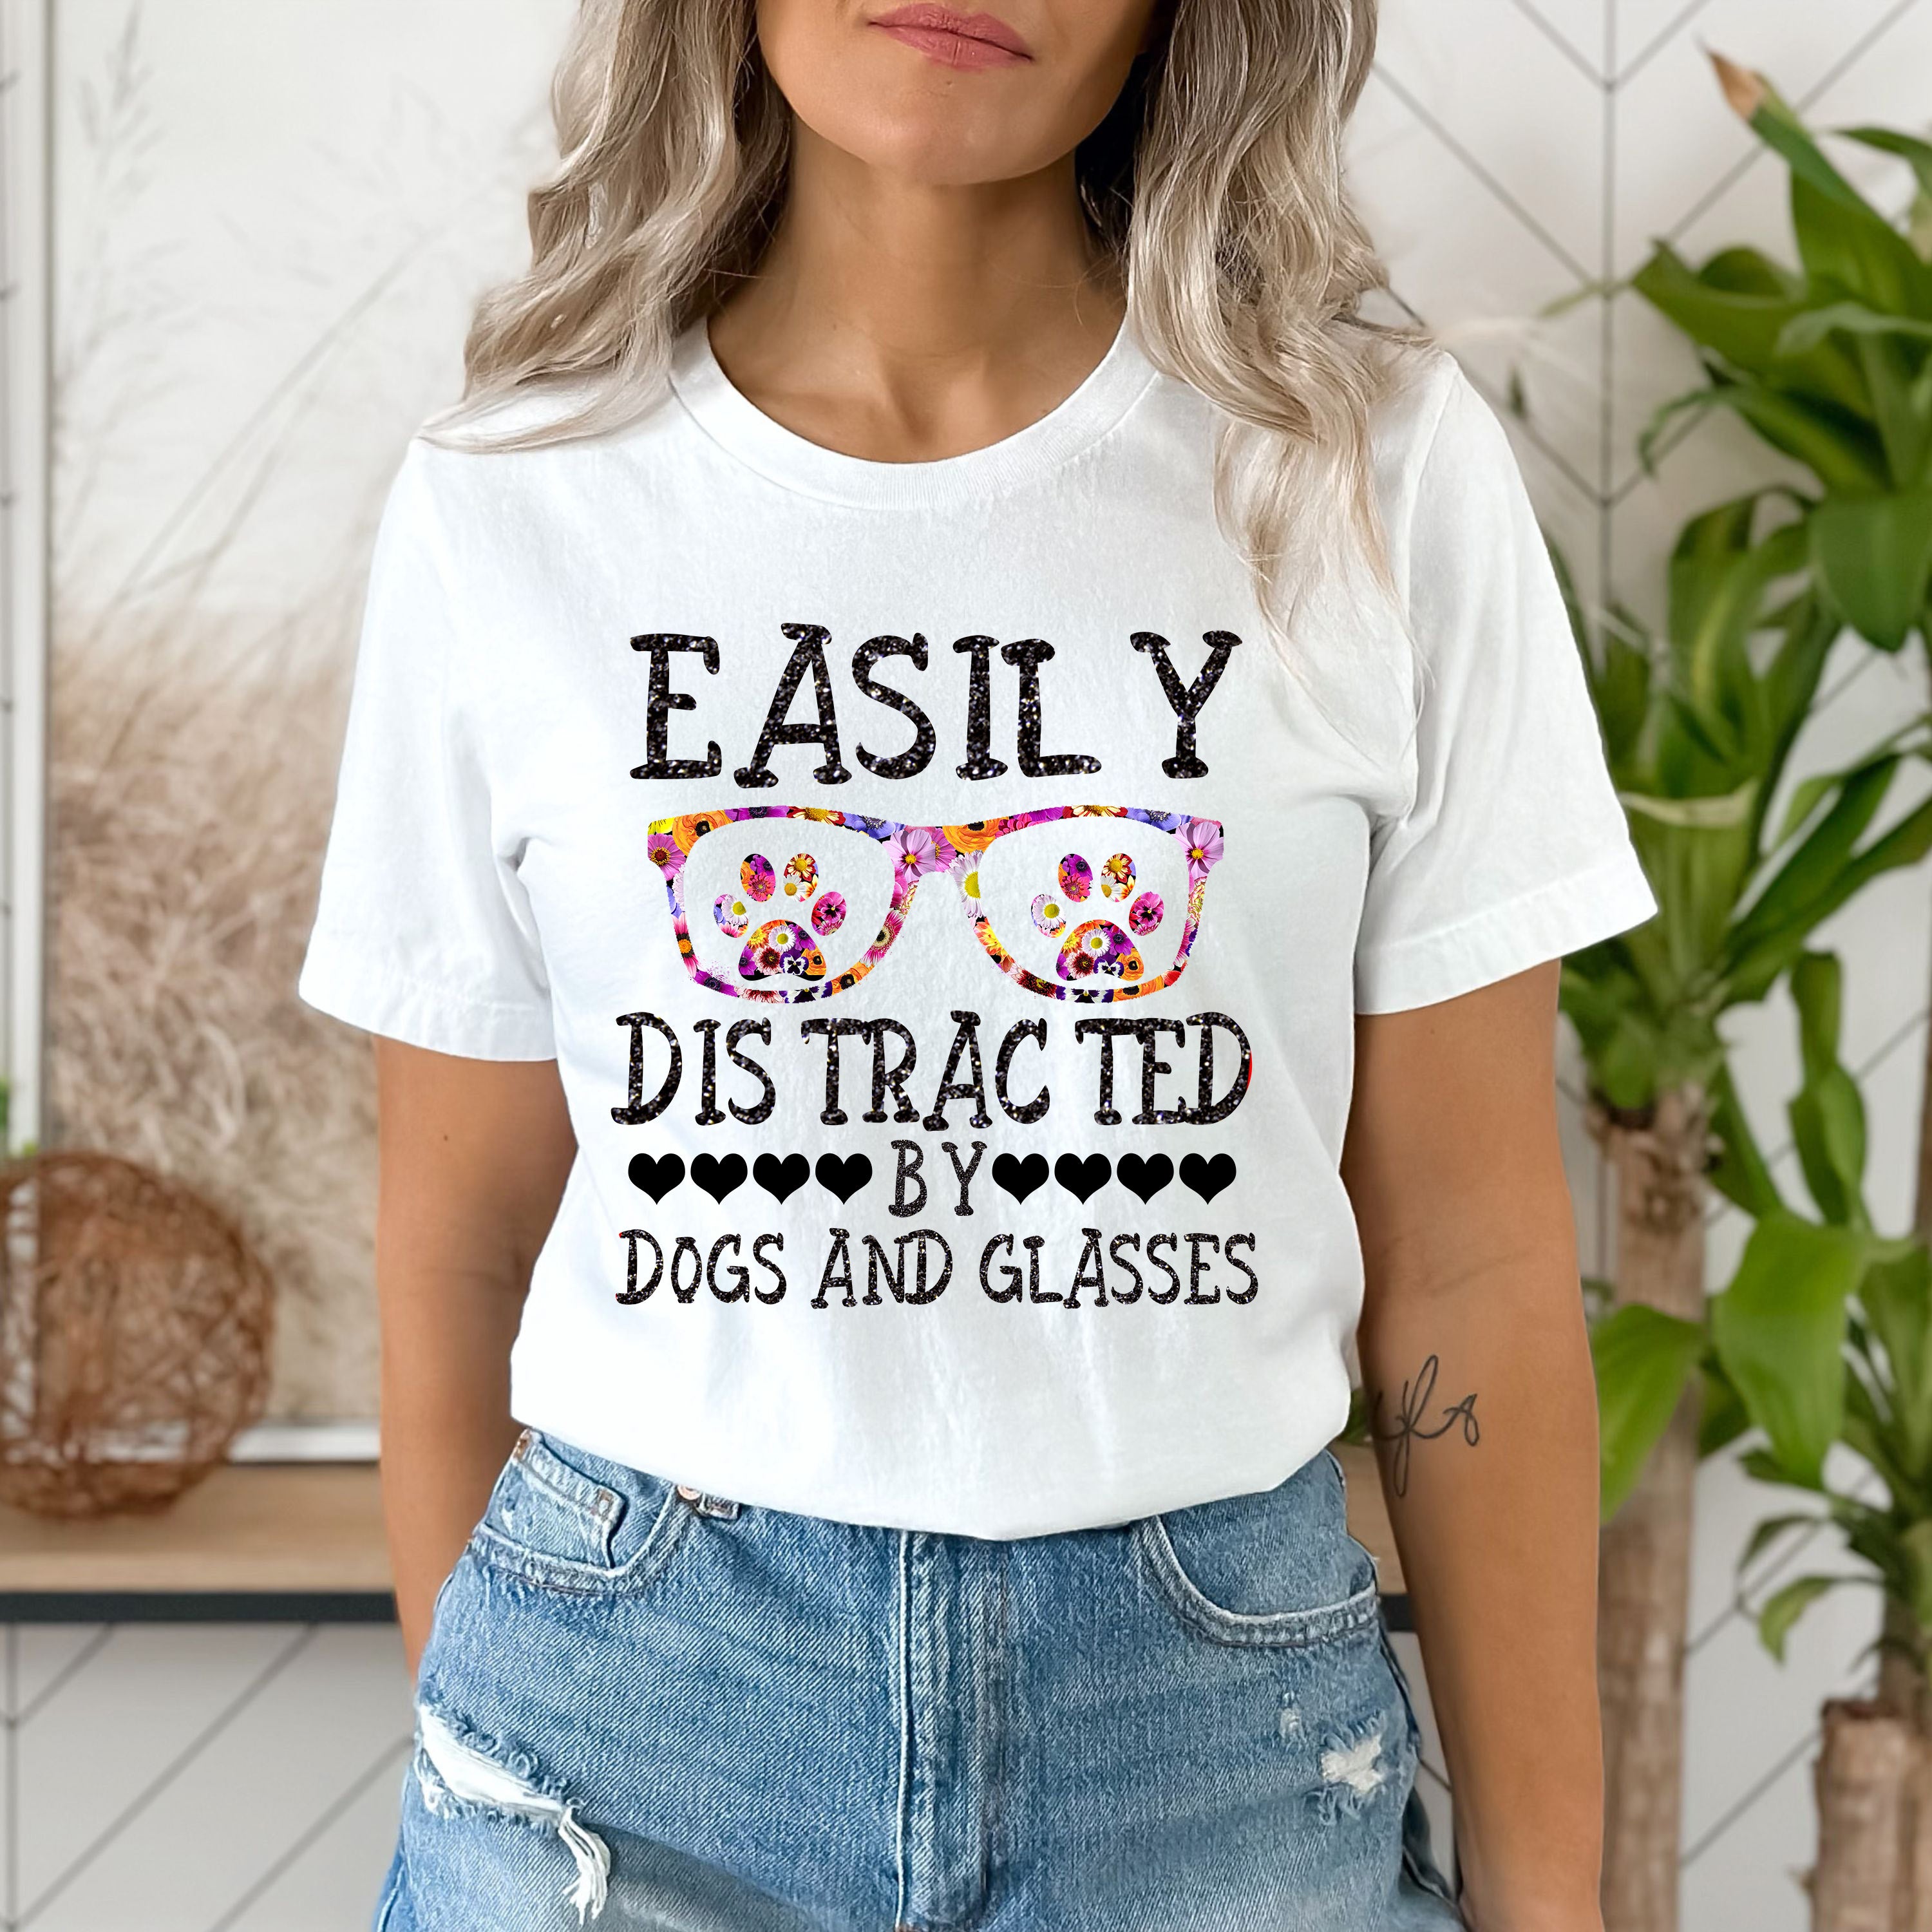 "EASILY DISTRACTED".